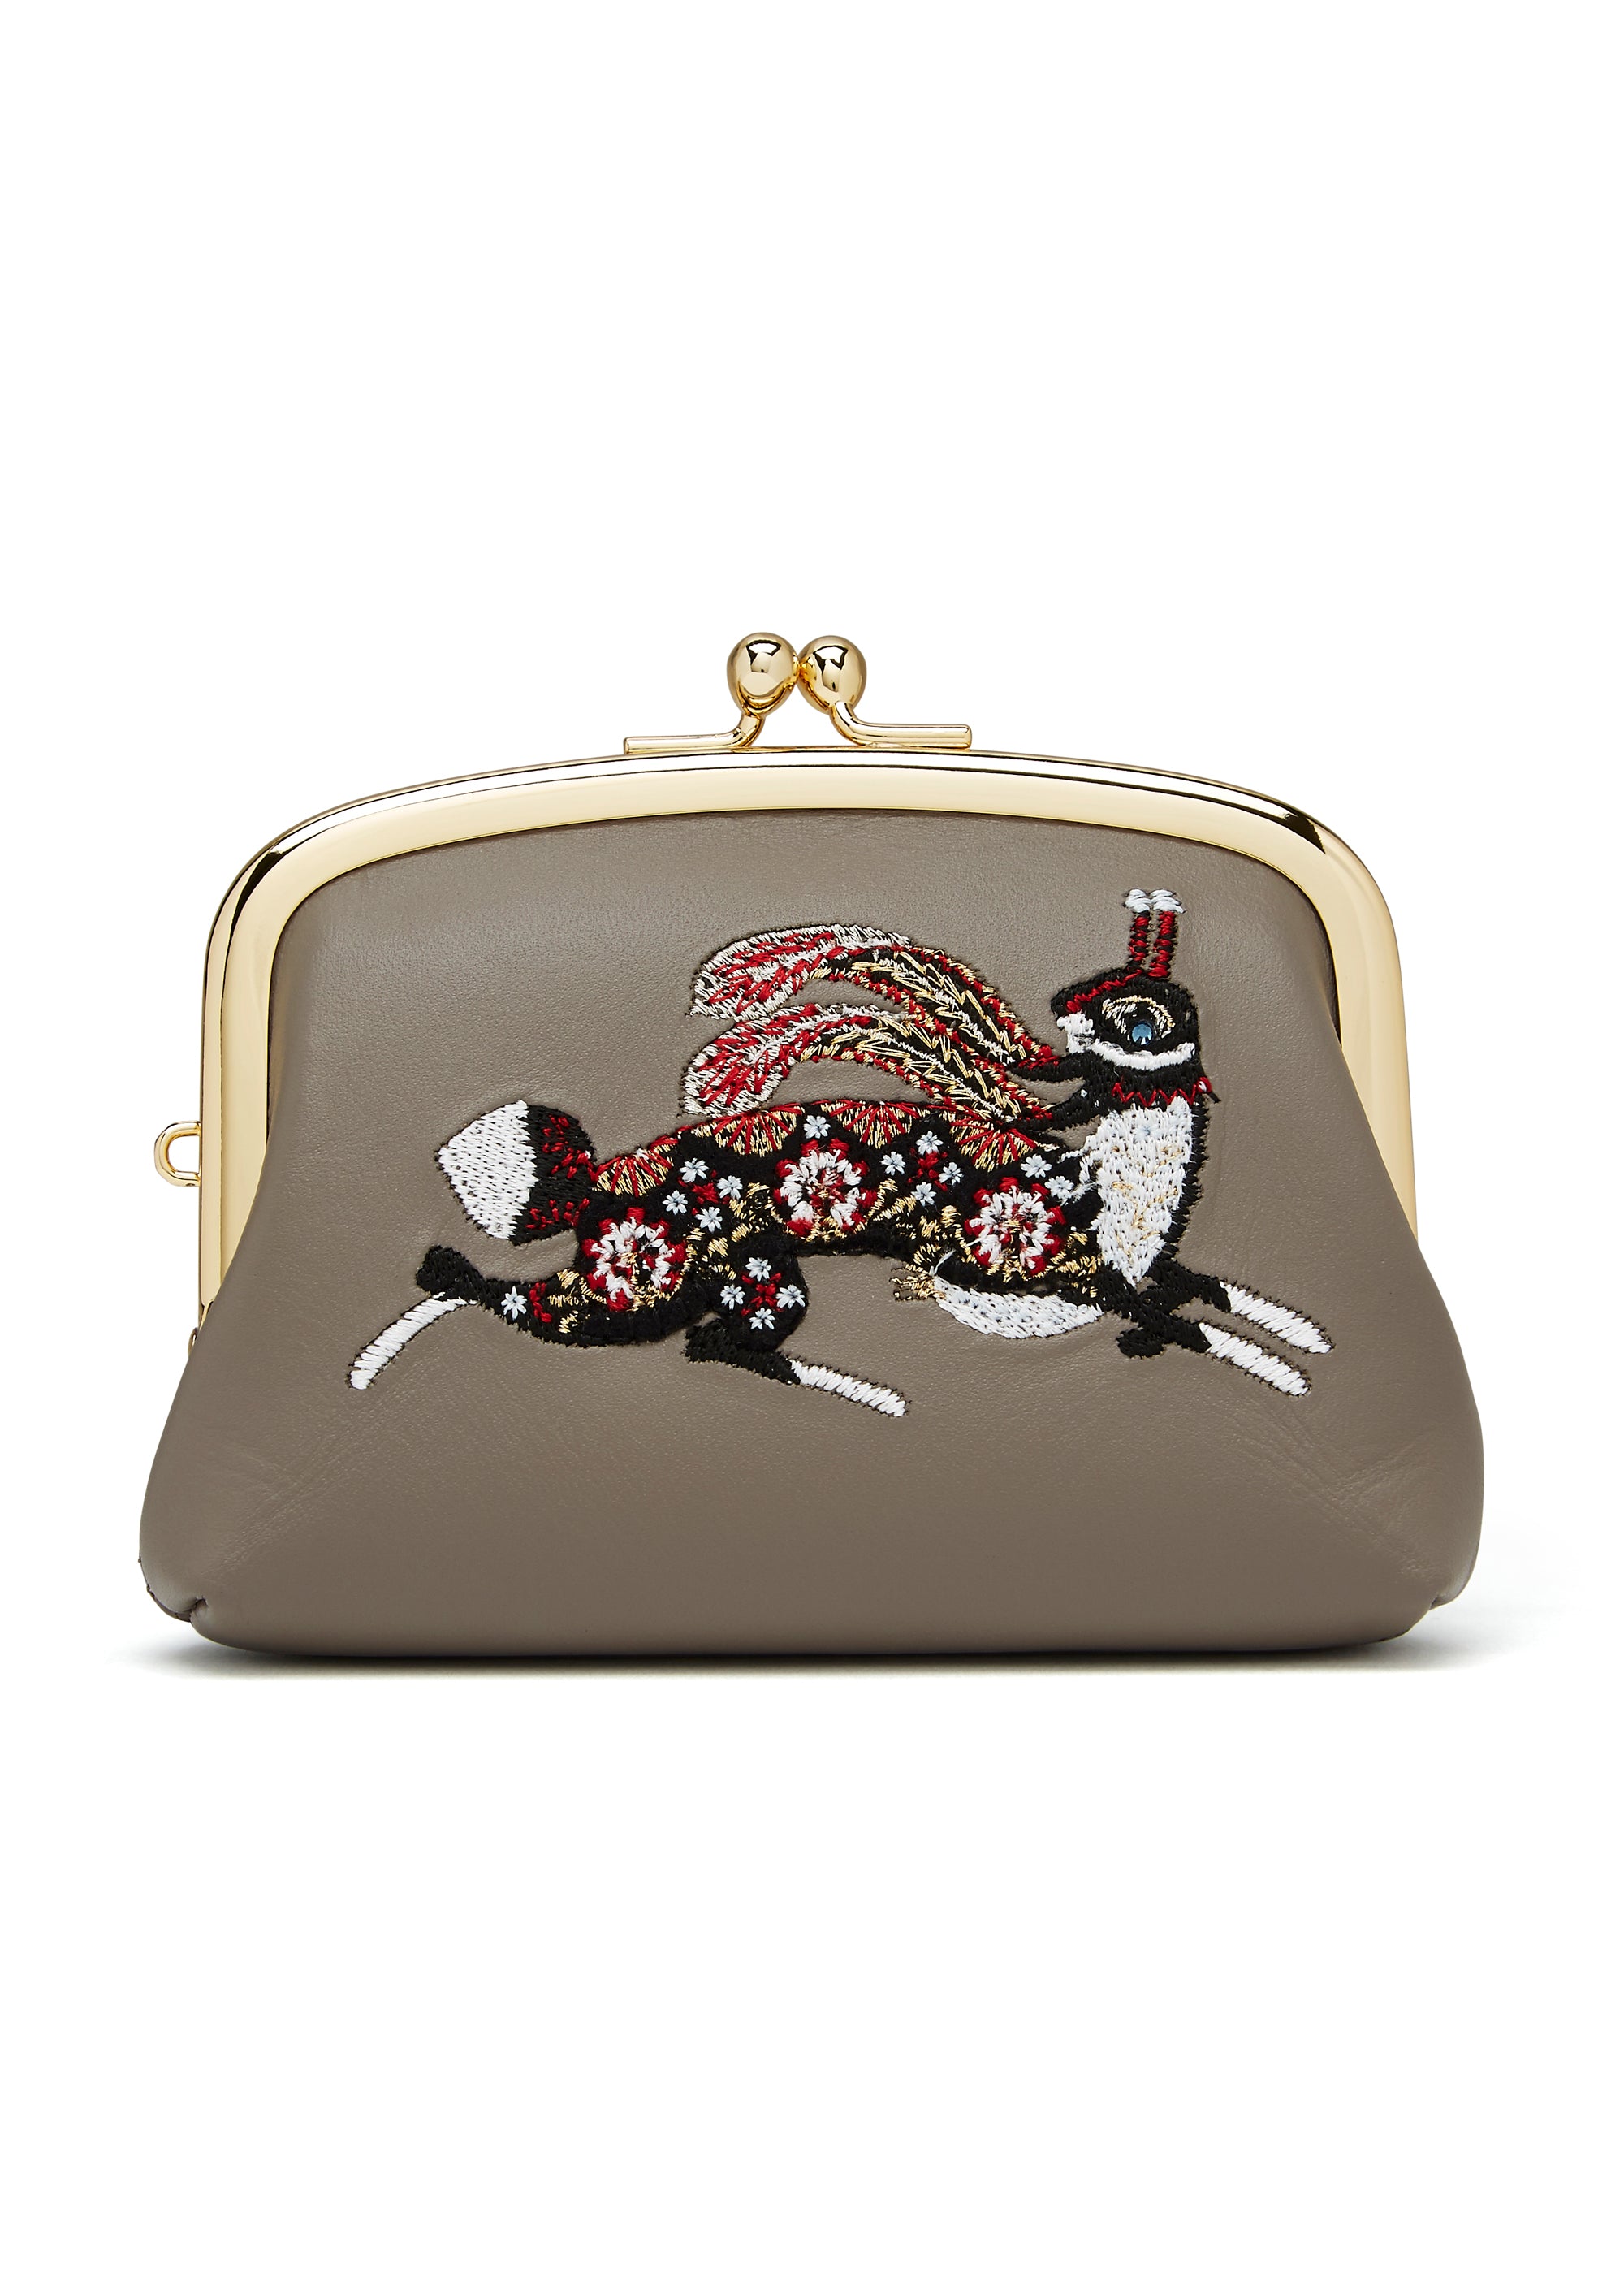 LOEWE Bunny leather coin purse | NET-A-PORTER